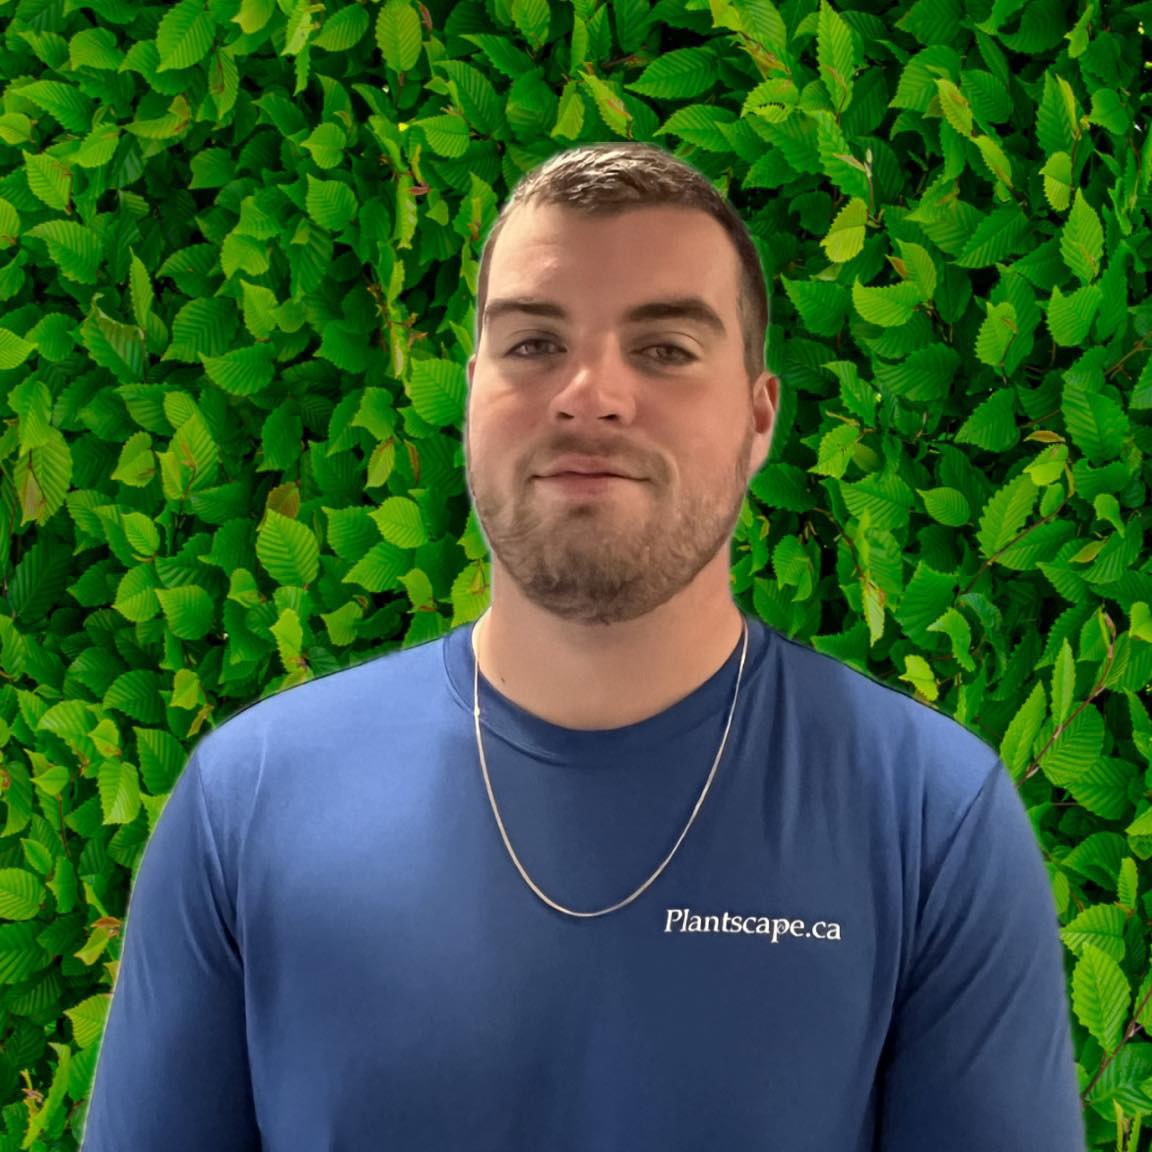 A person is smiling against a green leafy backdrop, wearing a blue shirt with "Plantscape.ca" text, and a necklace.